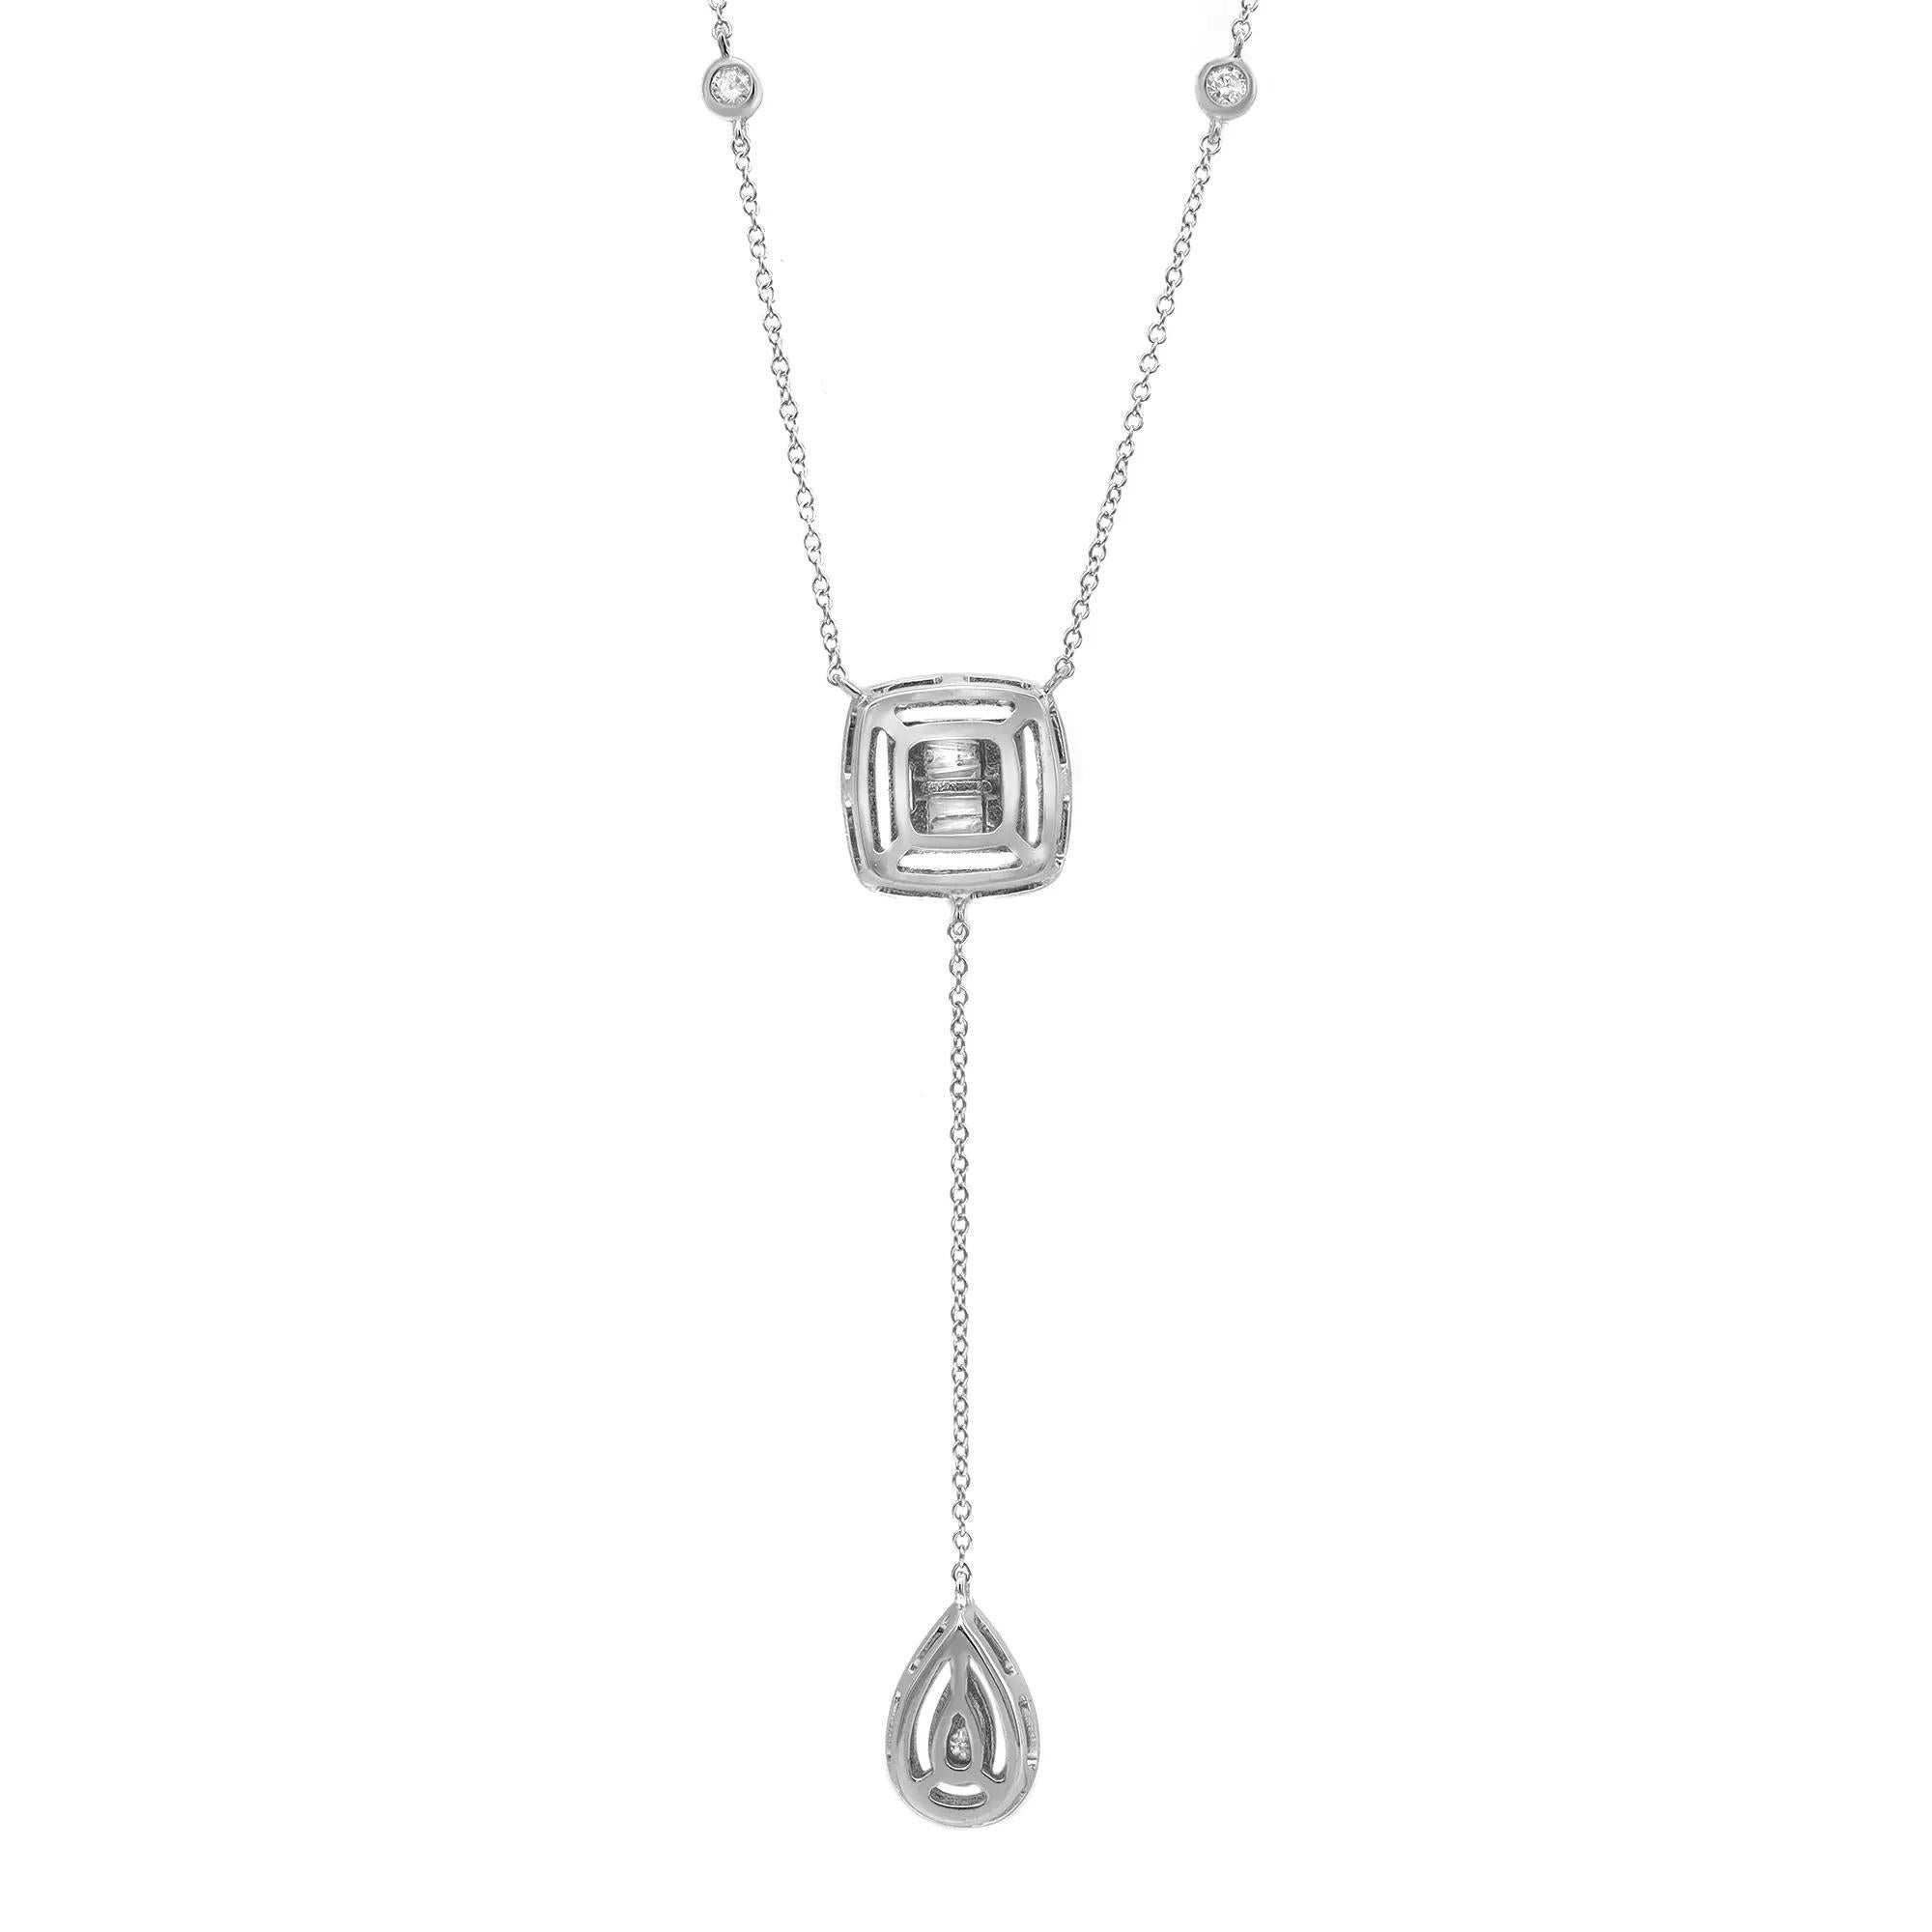 Dainty and pretty we know it will look wonderful for any occasion. Crafted in 14K White Gold. This beautiful diamond lariat necklace features a square shank pendant studded with baguette cut and round cut diamonds with a pear shape drop hanging